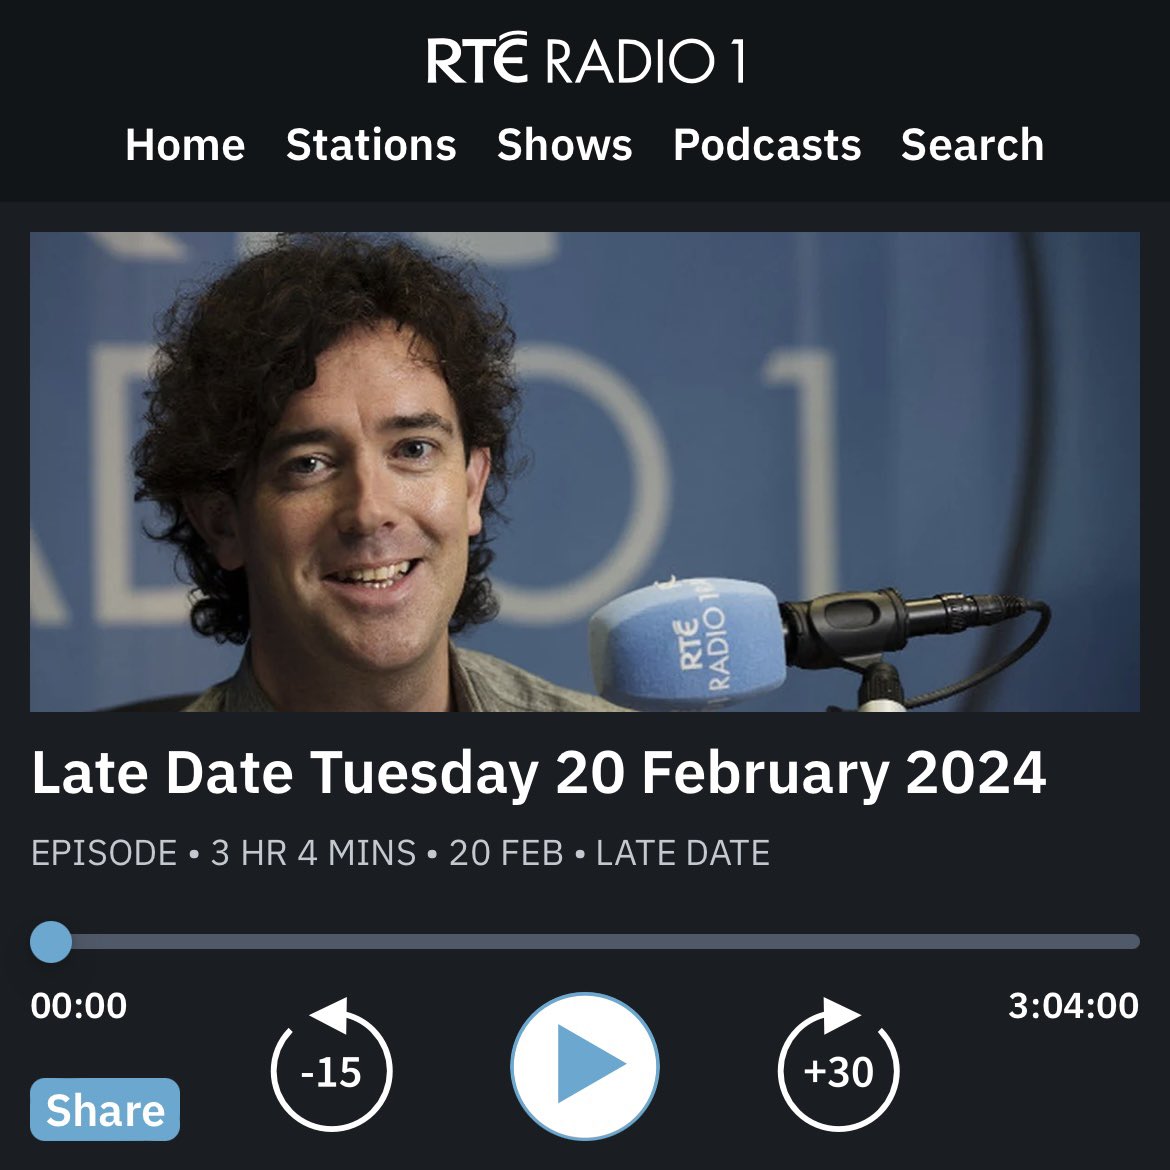 I’m so thrilled that ‘Beautiful One’ got played on last nights Late Date on @RTERadio1 Huge thanks to Cathal Murray 😊